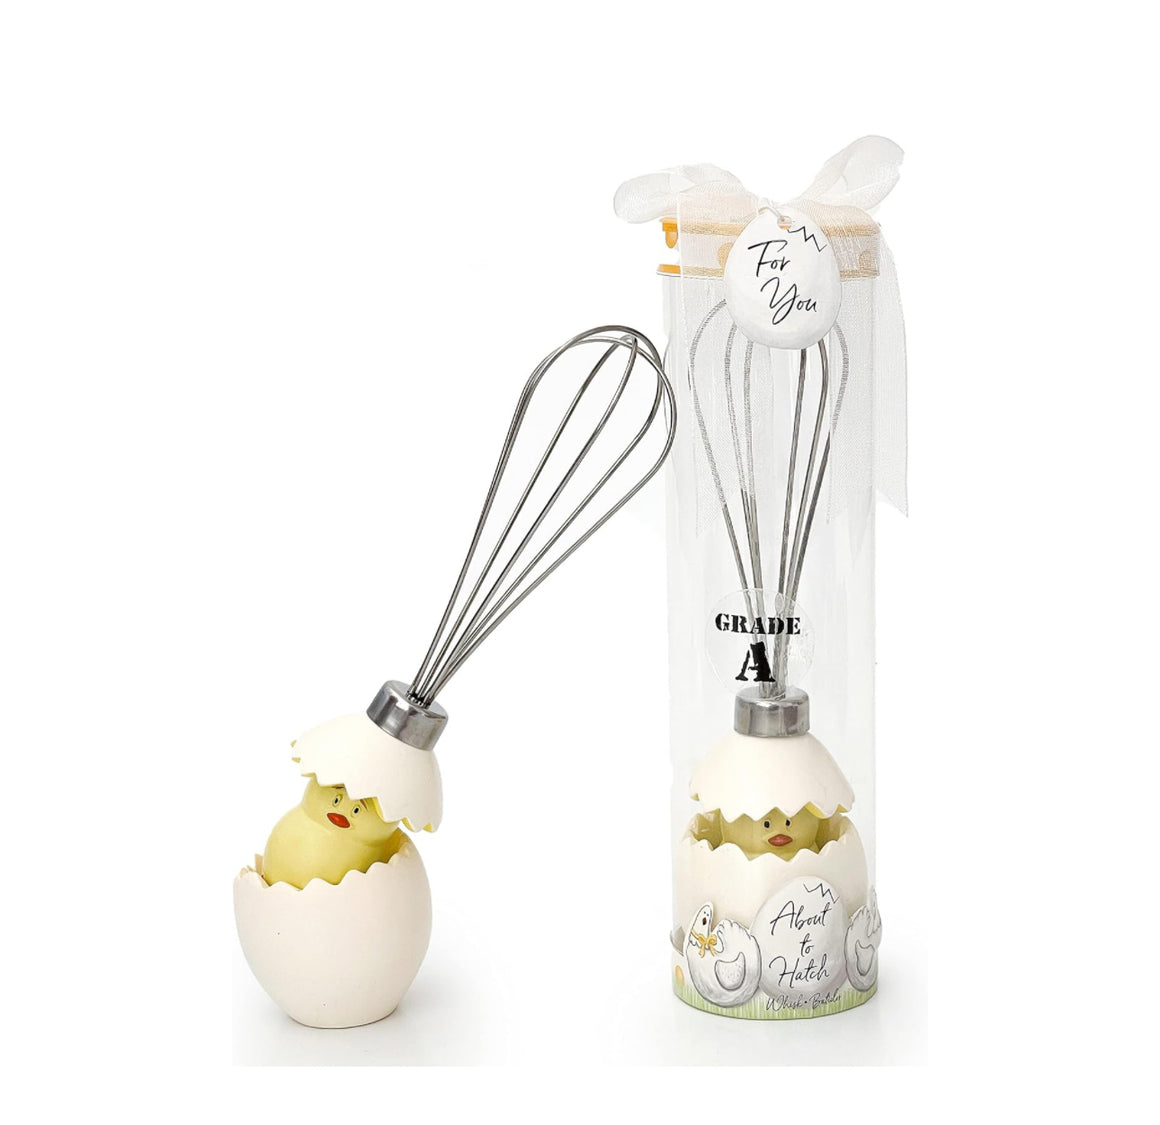 K. Chanel Silver and White Stainless-Steel Egg Whisk